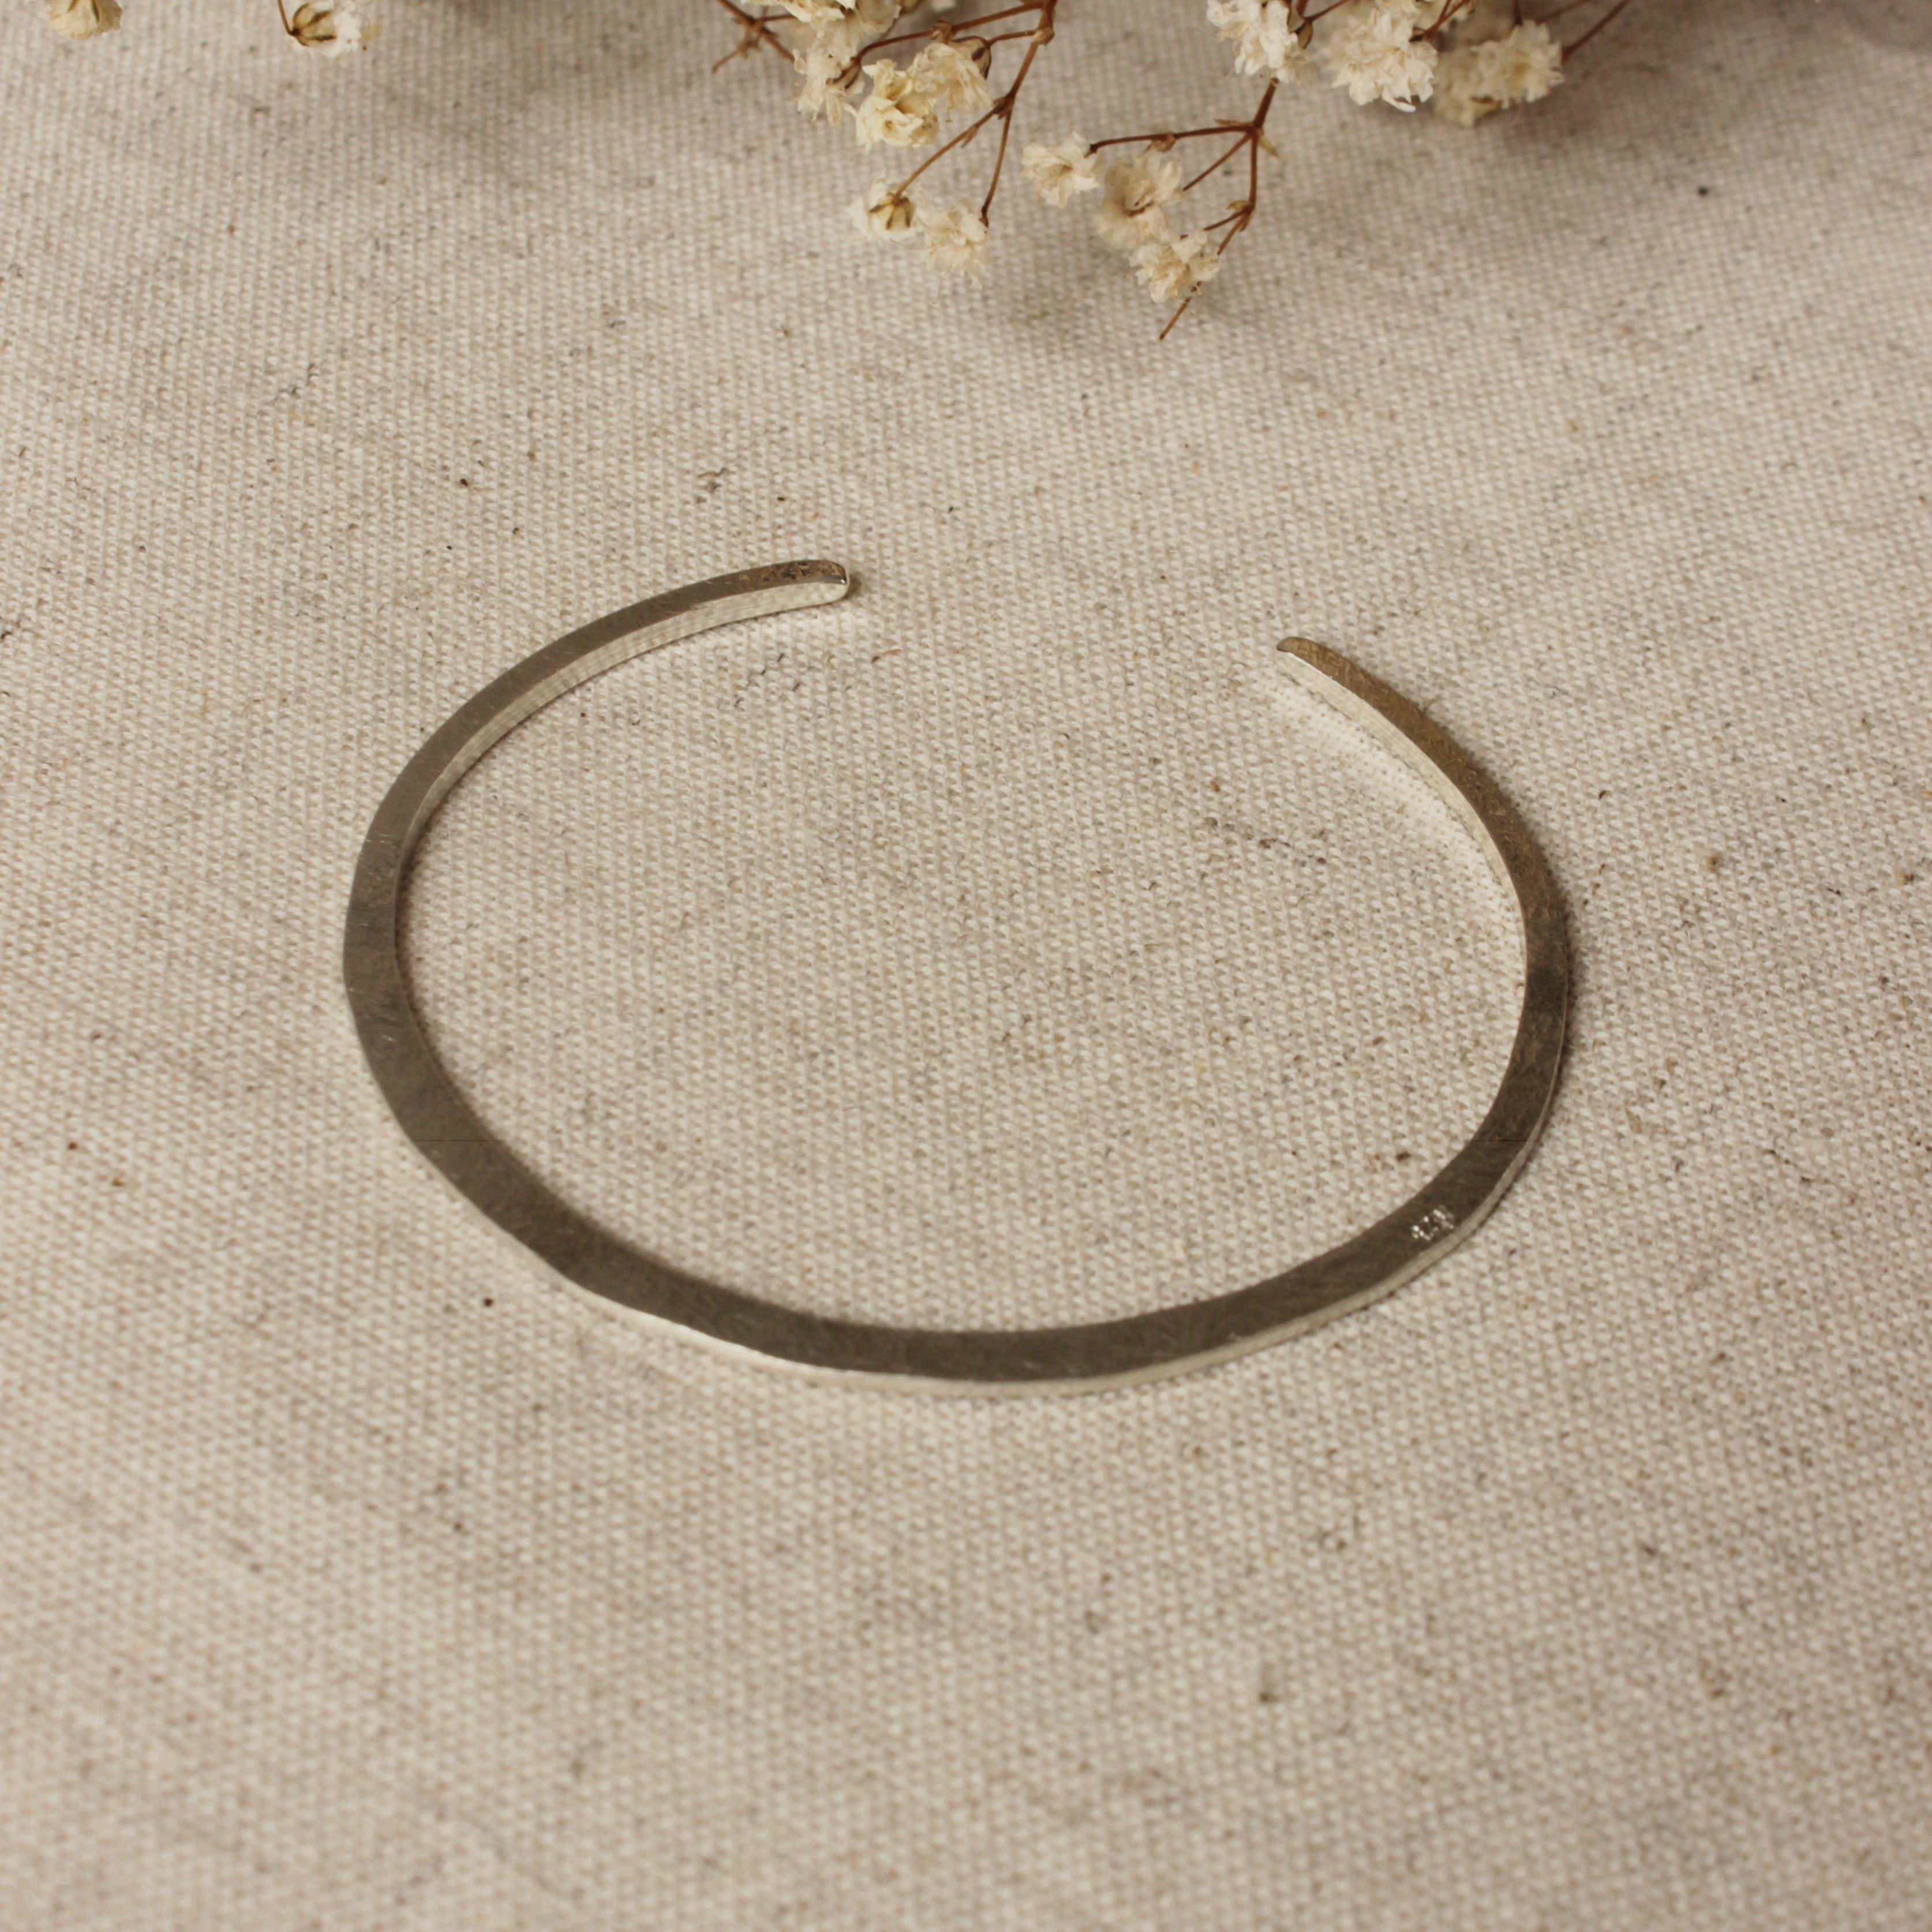 This delicate silver bangle is hammered flat and features a soft texture on one side and a smooth texture on the other side. This bangle is fully adjustable and ready to fit all wrist sizes.